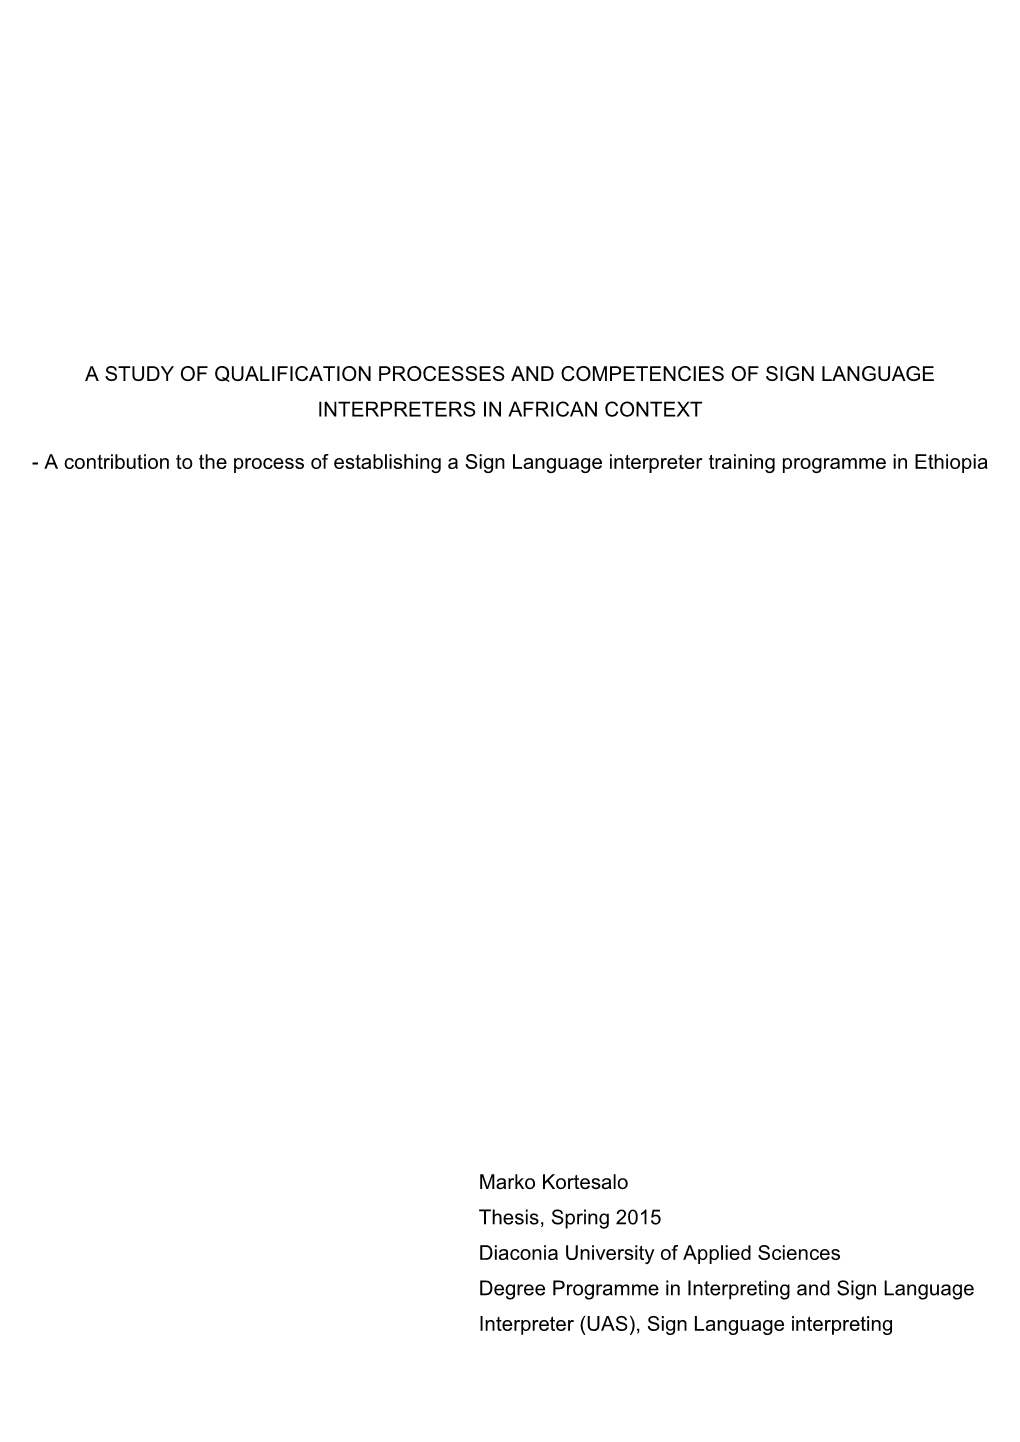 A Study of Qualification Processes and Competencies of Sign Language Interpreters in African Context